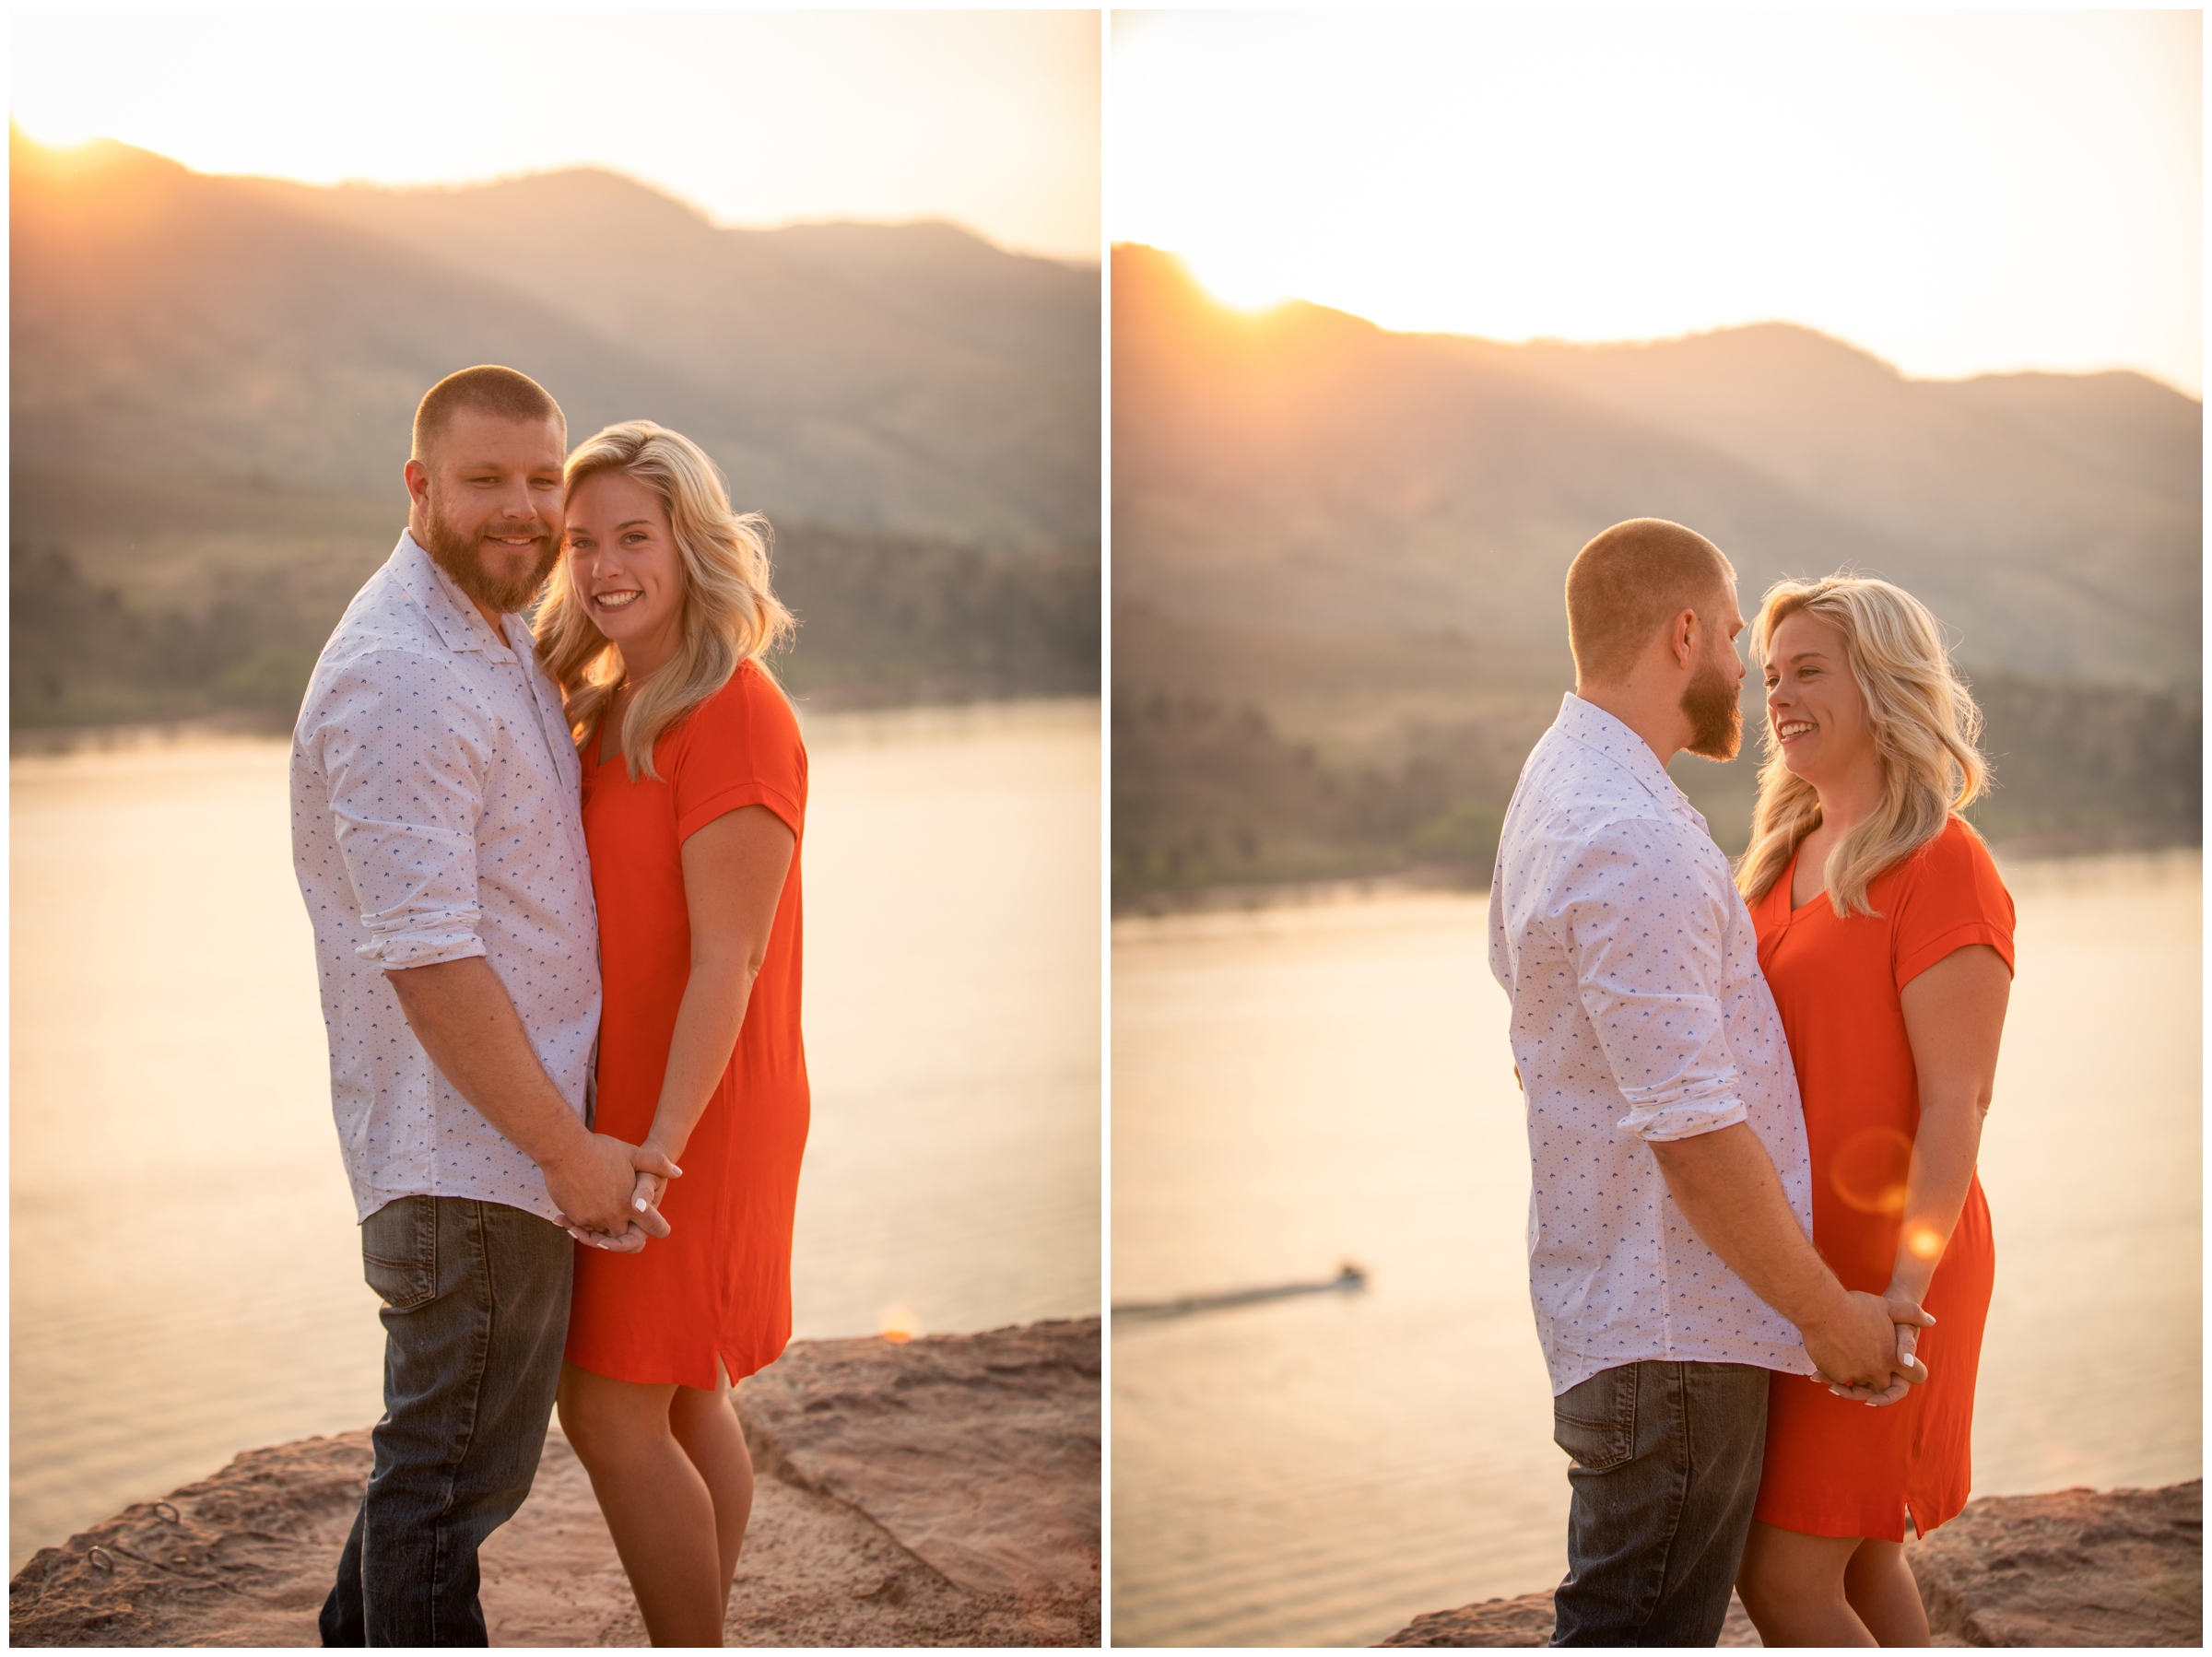 Rotary Park Ft. Collins engagement photos by Plum Pretty Photography 